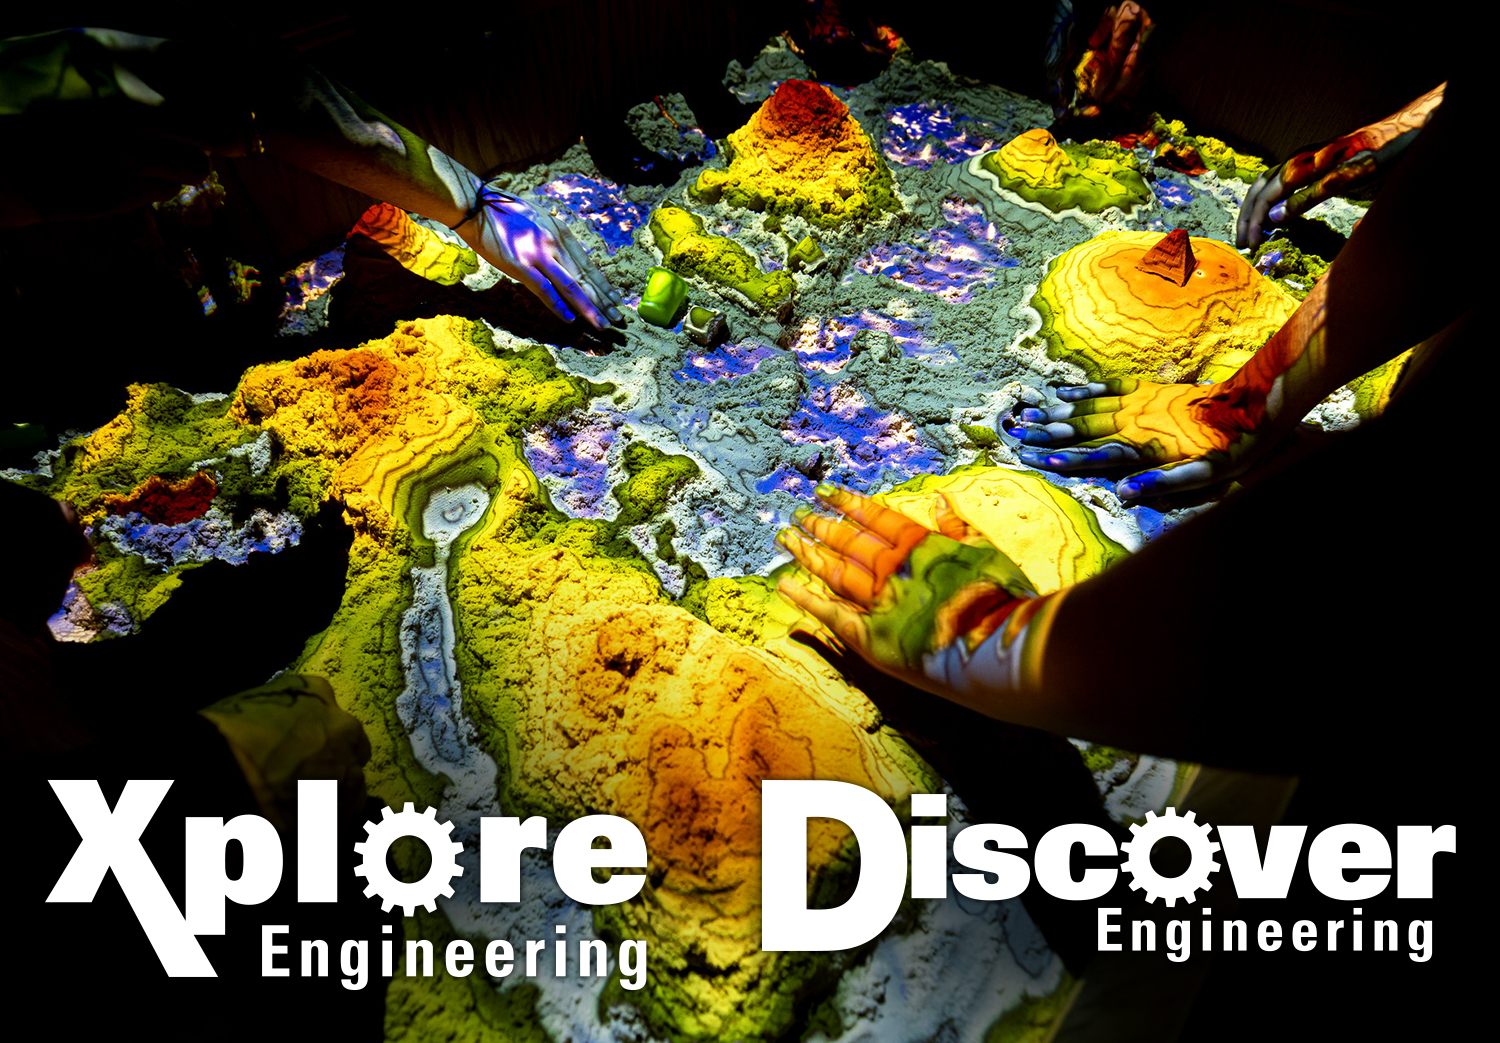 Xplore and Discover engineering graphic